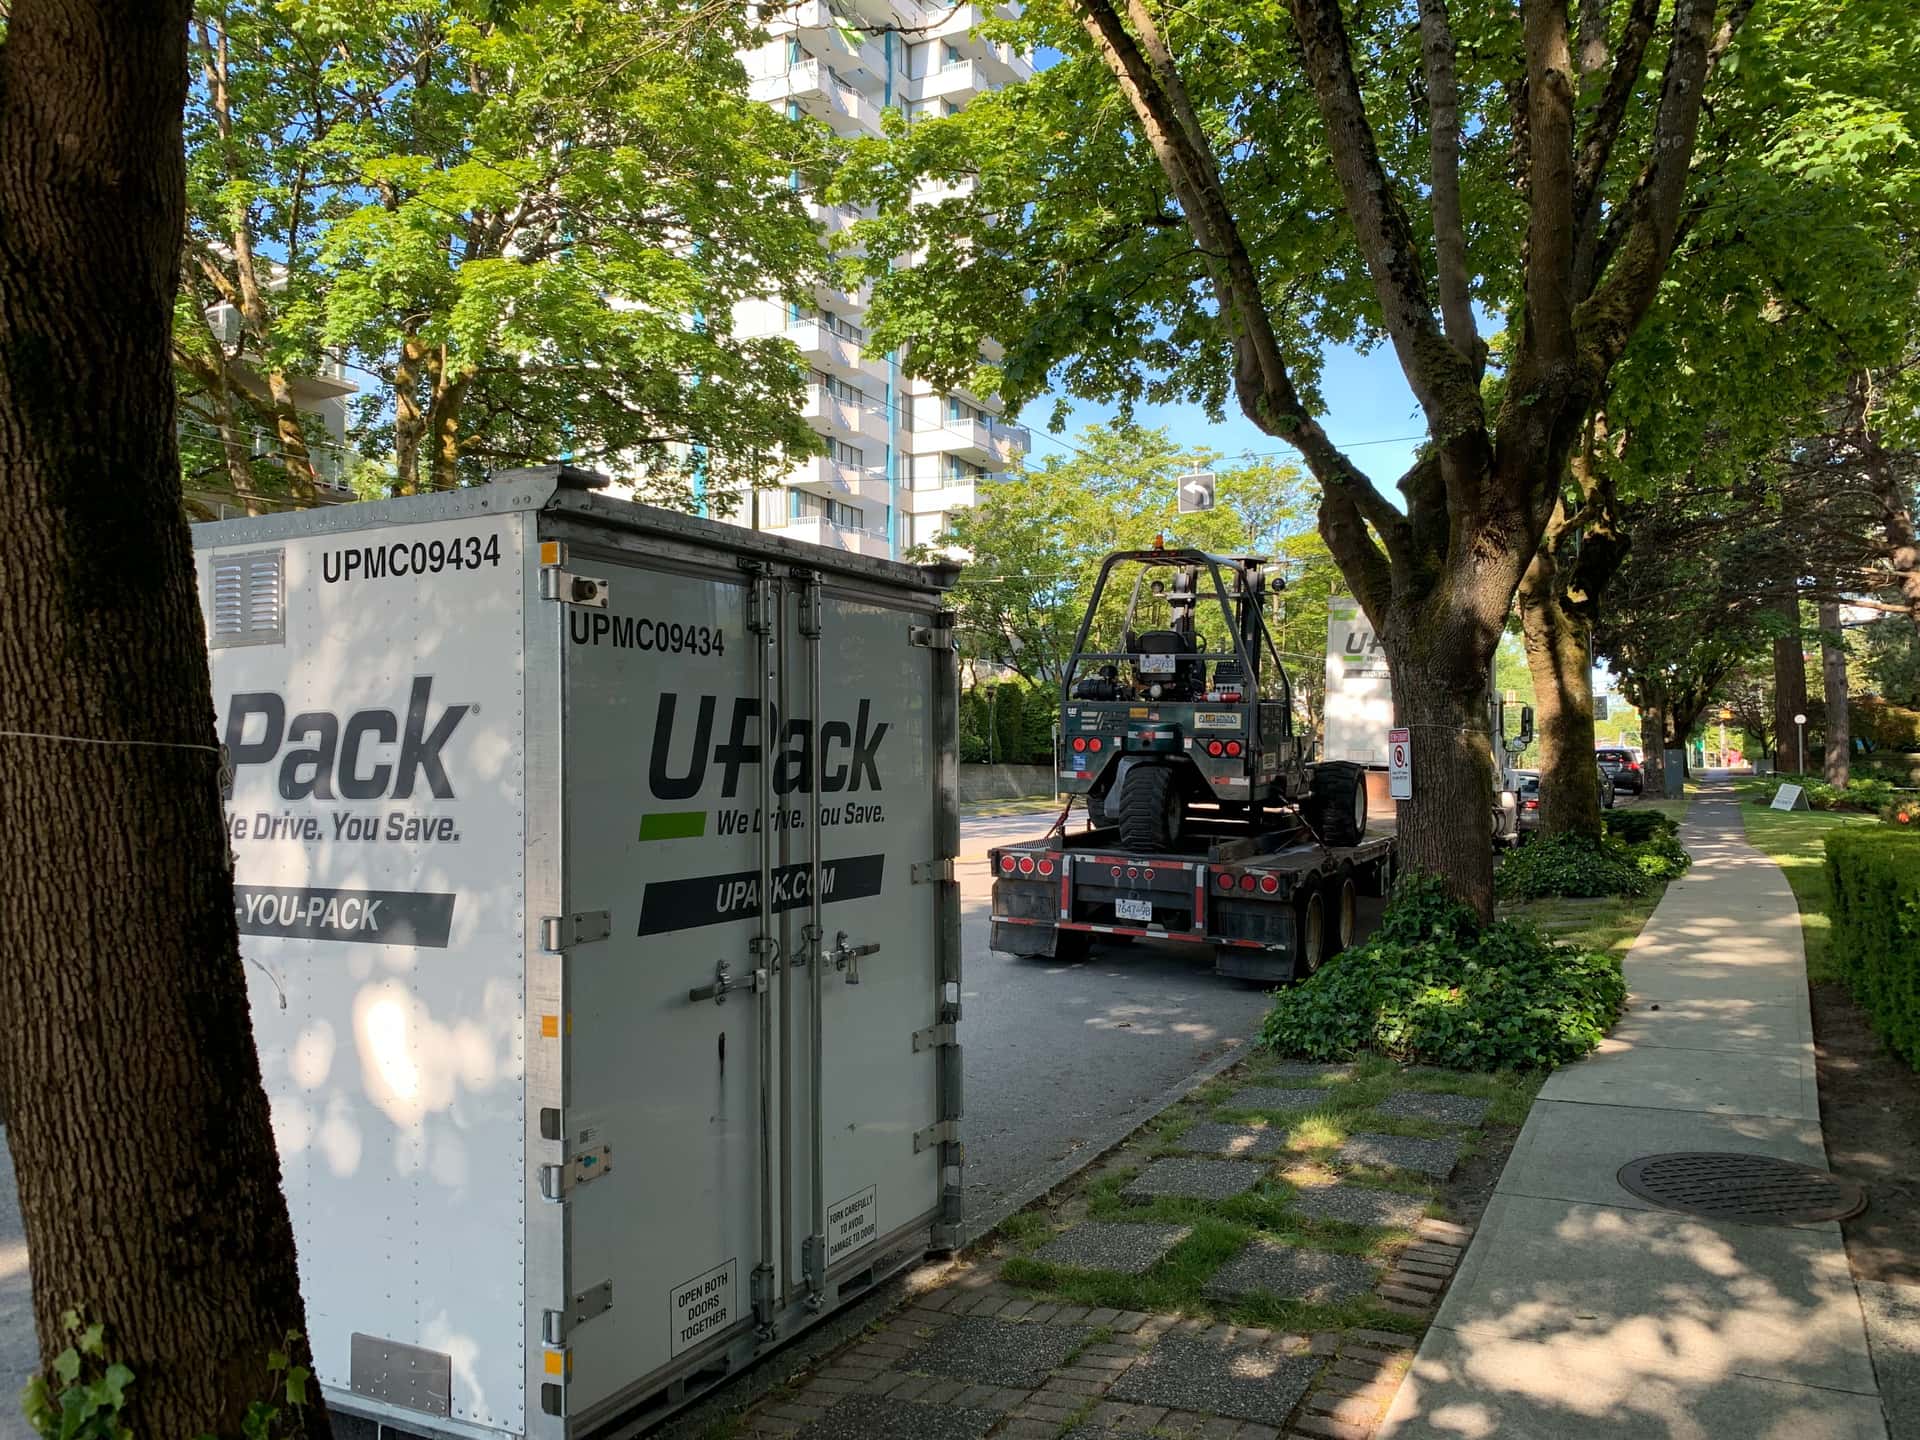 U-Pack moving pod and truck-mounted forklift